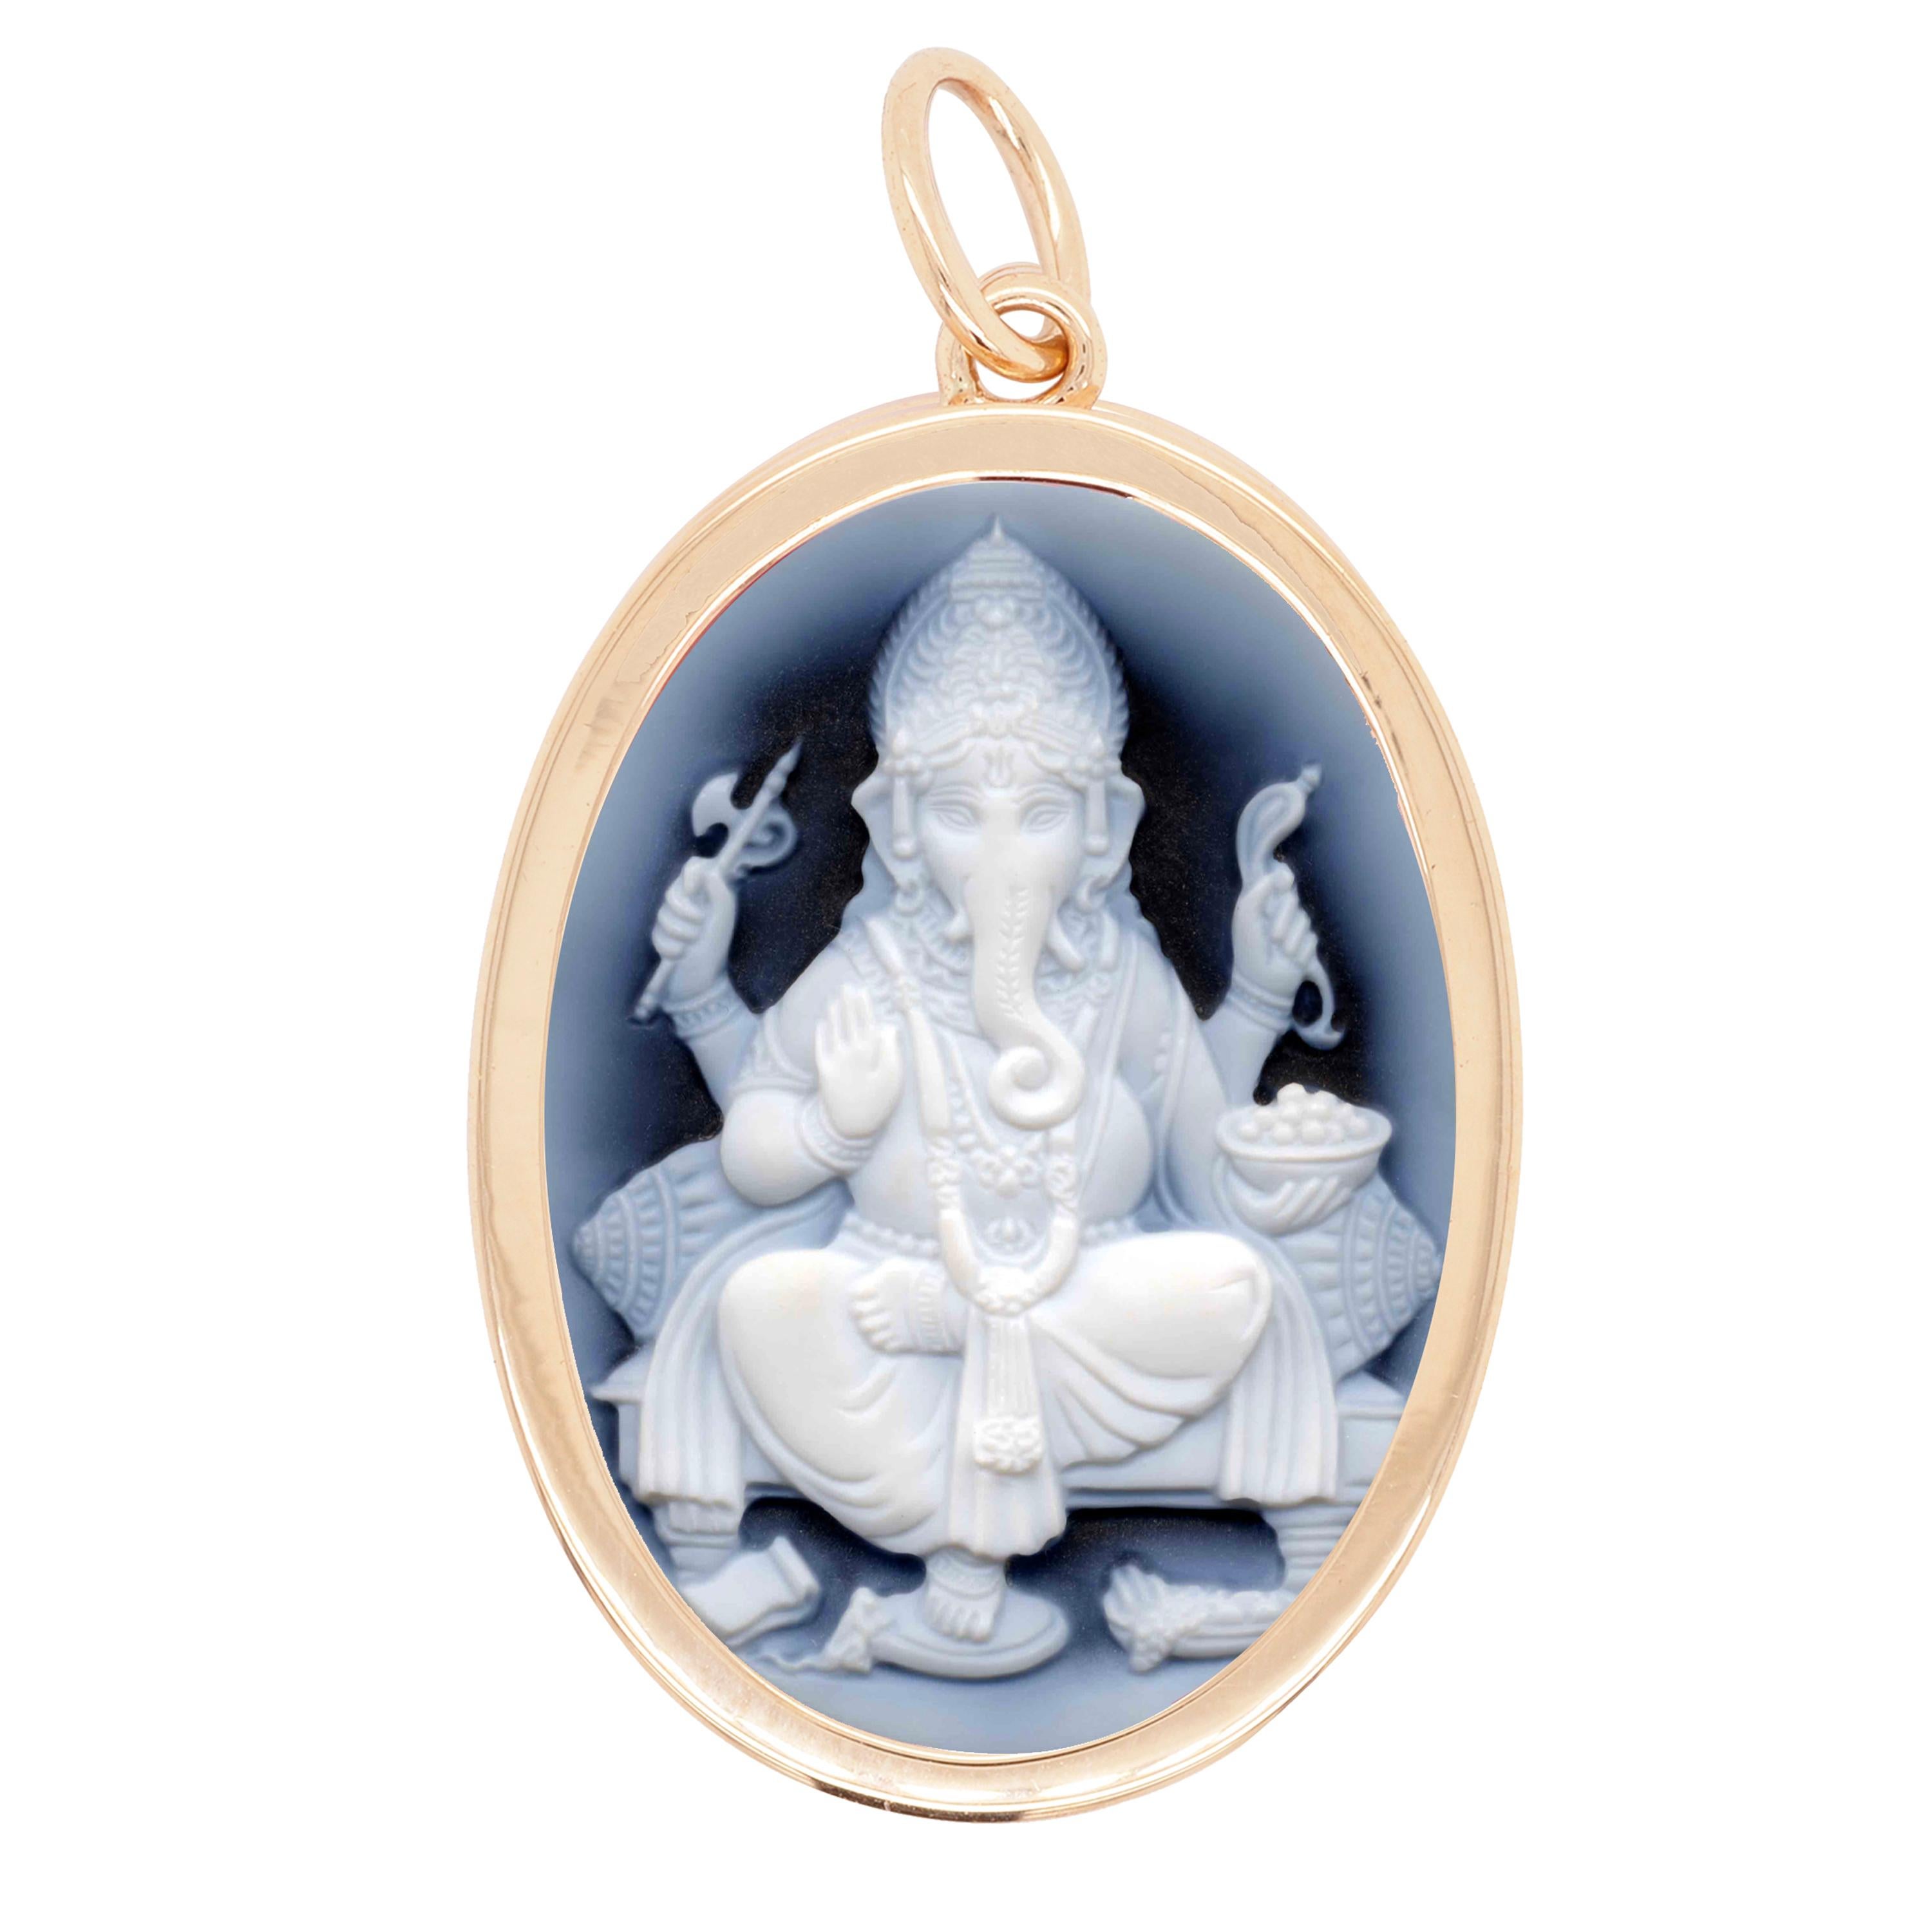 Reversible 14 karat yellow gold ganesha agate cameo om pendant necklace.

Get two pendants in one with this reversible necklace in 14 karat yellow gold ganesha agate cameo om pendant necklace. The pendant is set in 14 karat gold features ganesha